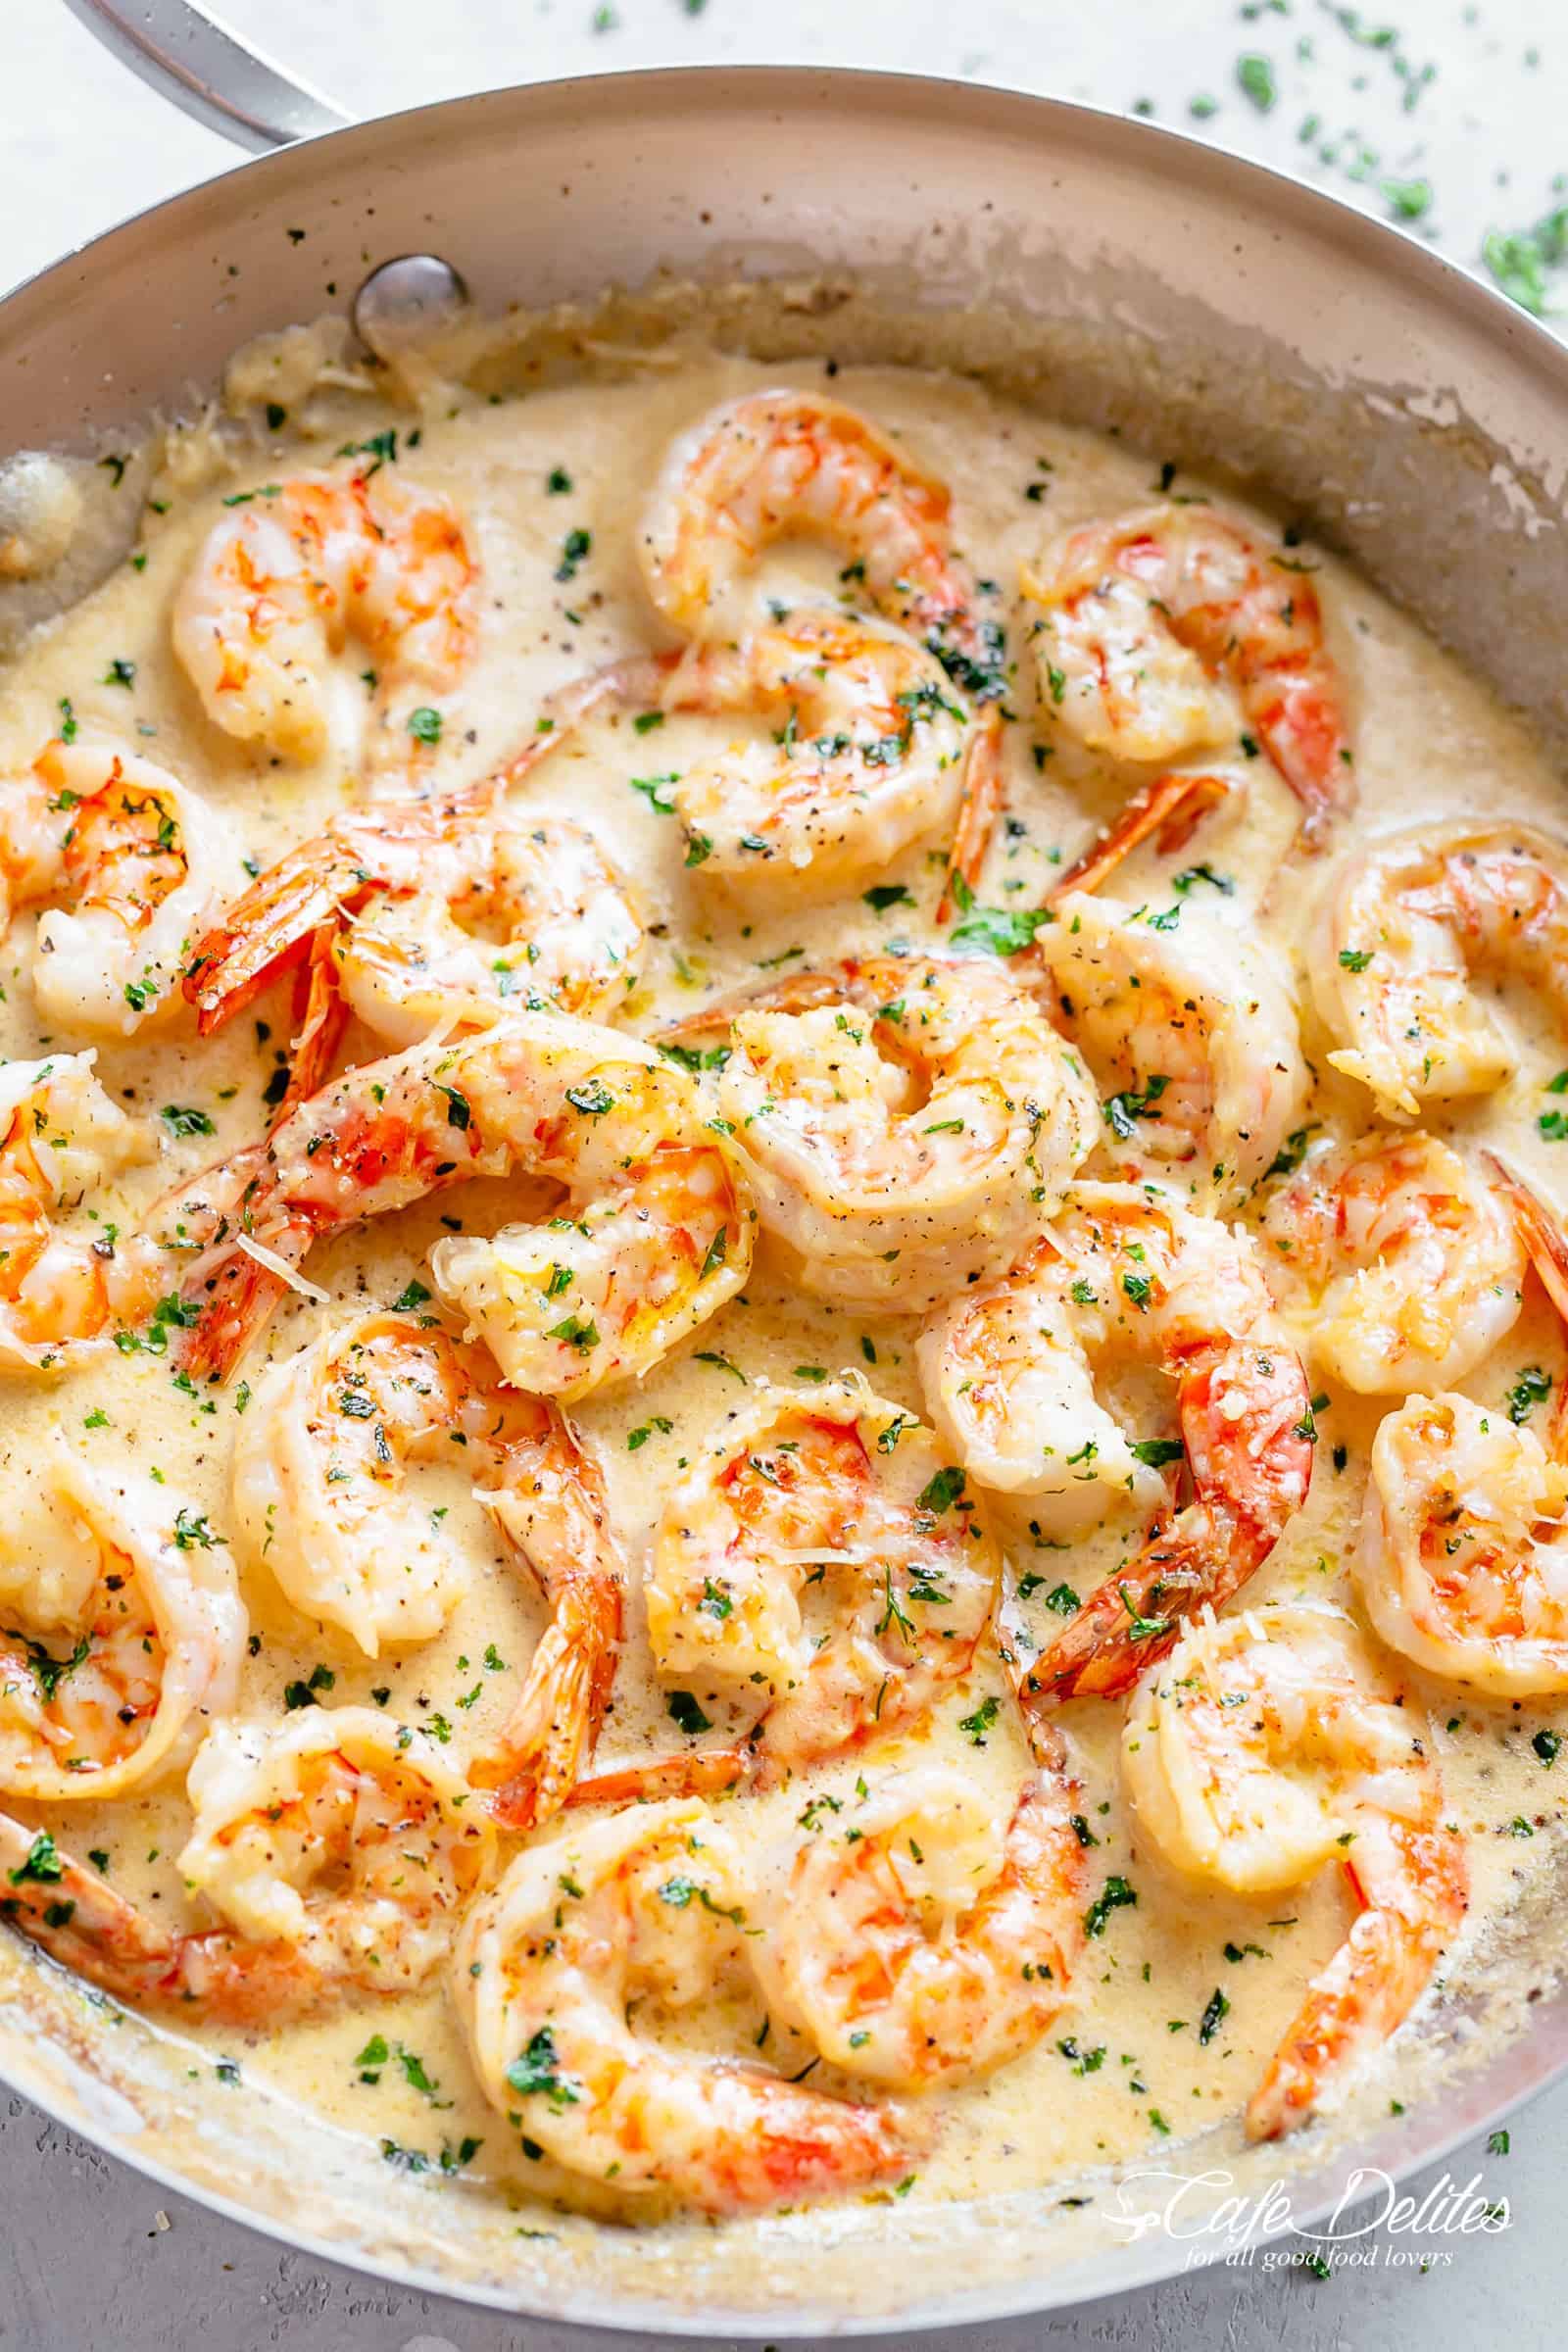 Creamy Garlic Shrimp in a silver frying pan garnished with fresh chopped parsley on a light grey background. A deliciously easy Shrimp Recipe coated in a rustic and buttery sauce ready in less than 10 minutes, people will think there is a hidden chef in your kitchen! Transform ingredients you most likely already have in your refrigerator into an incredible dinner! | cafedelites.com